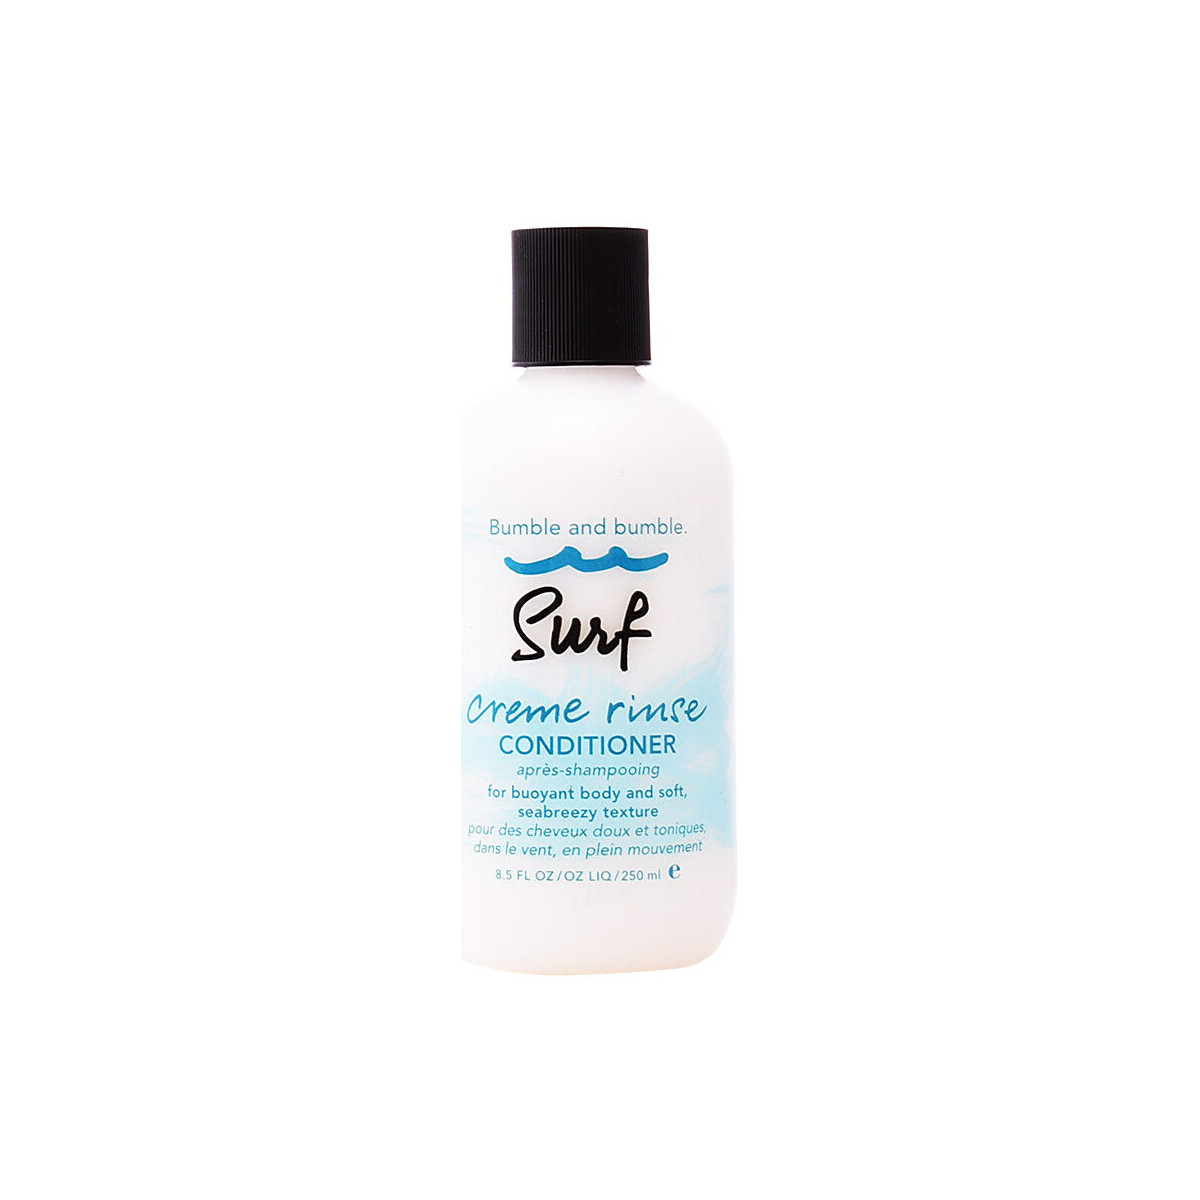 Beauty Spülung Bumble & Bumble Surf Creme Rinse Conditioner 